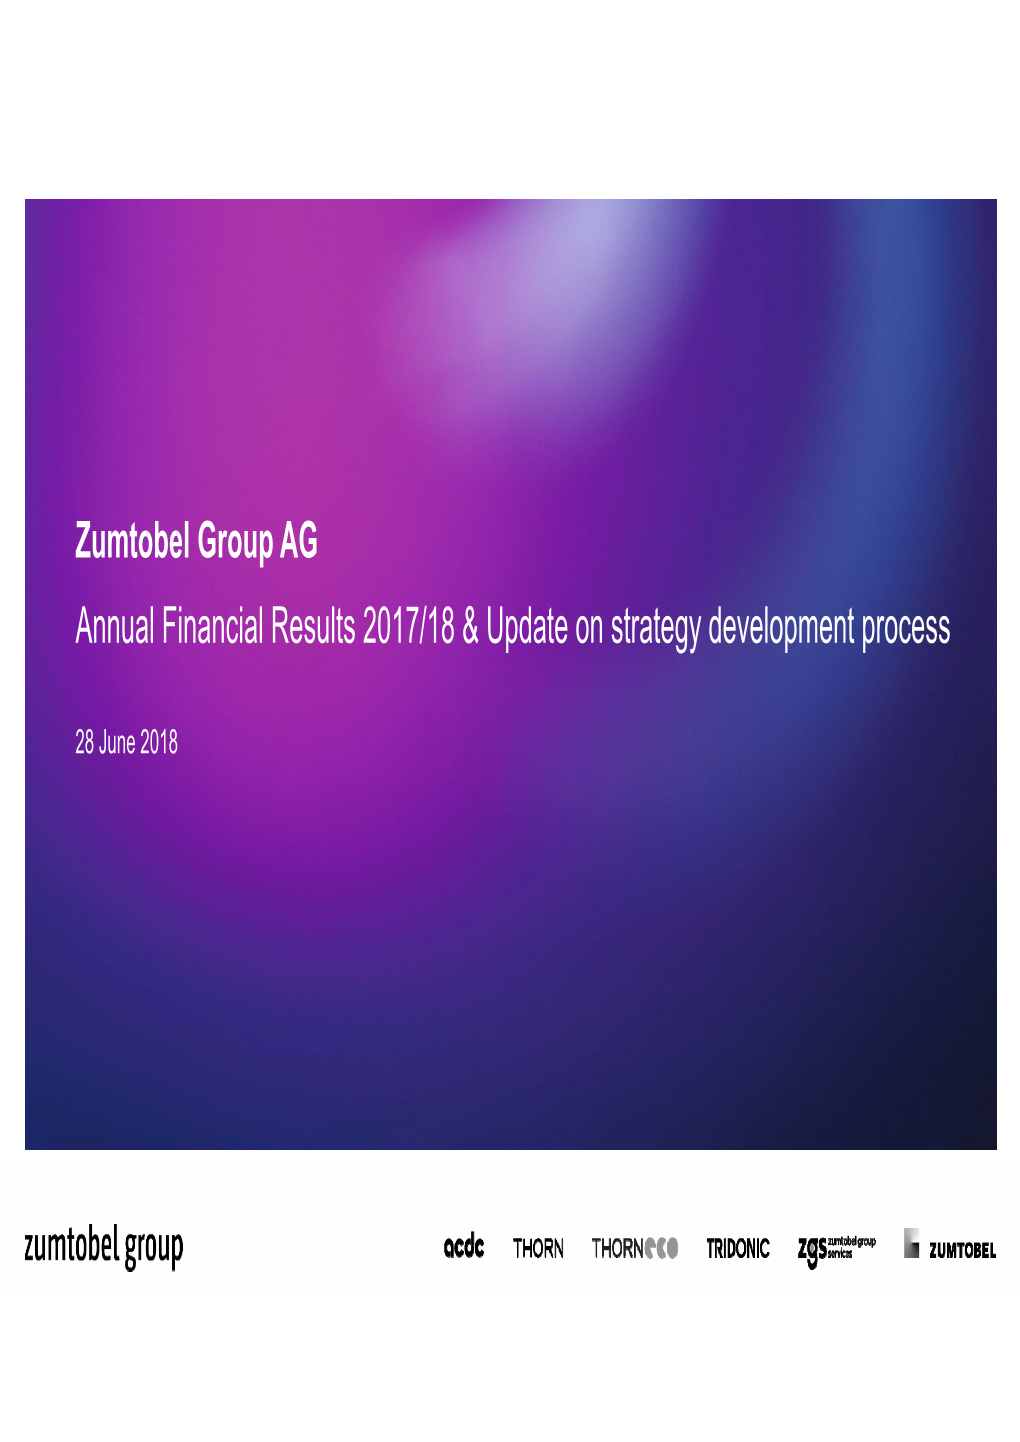 Annual Financial Results 2017/18 & Update on Strategy Development Process Zumtobel Group AG